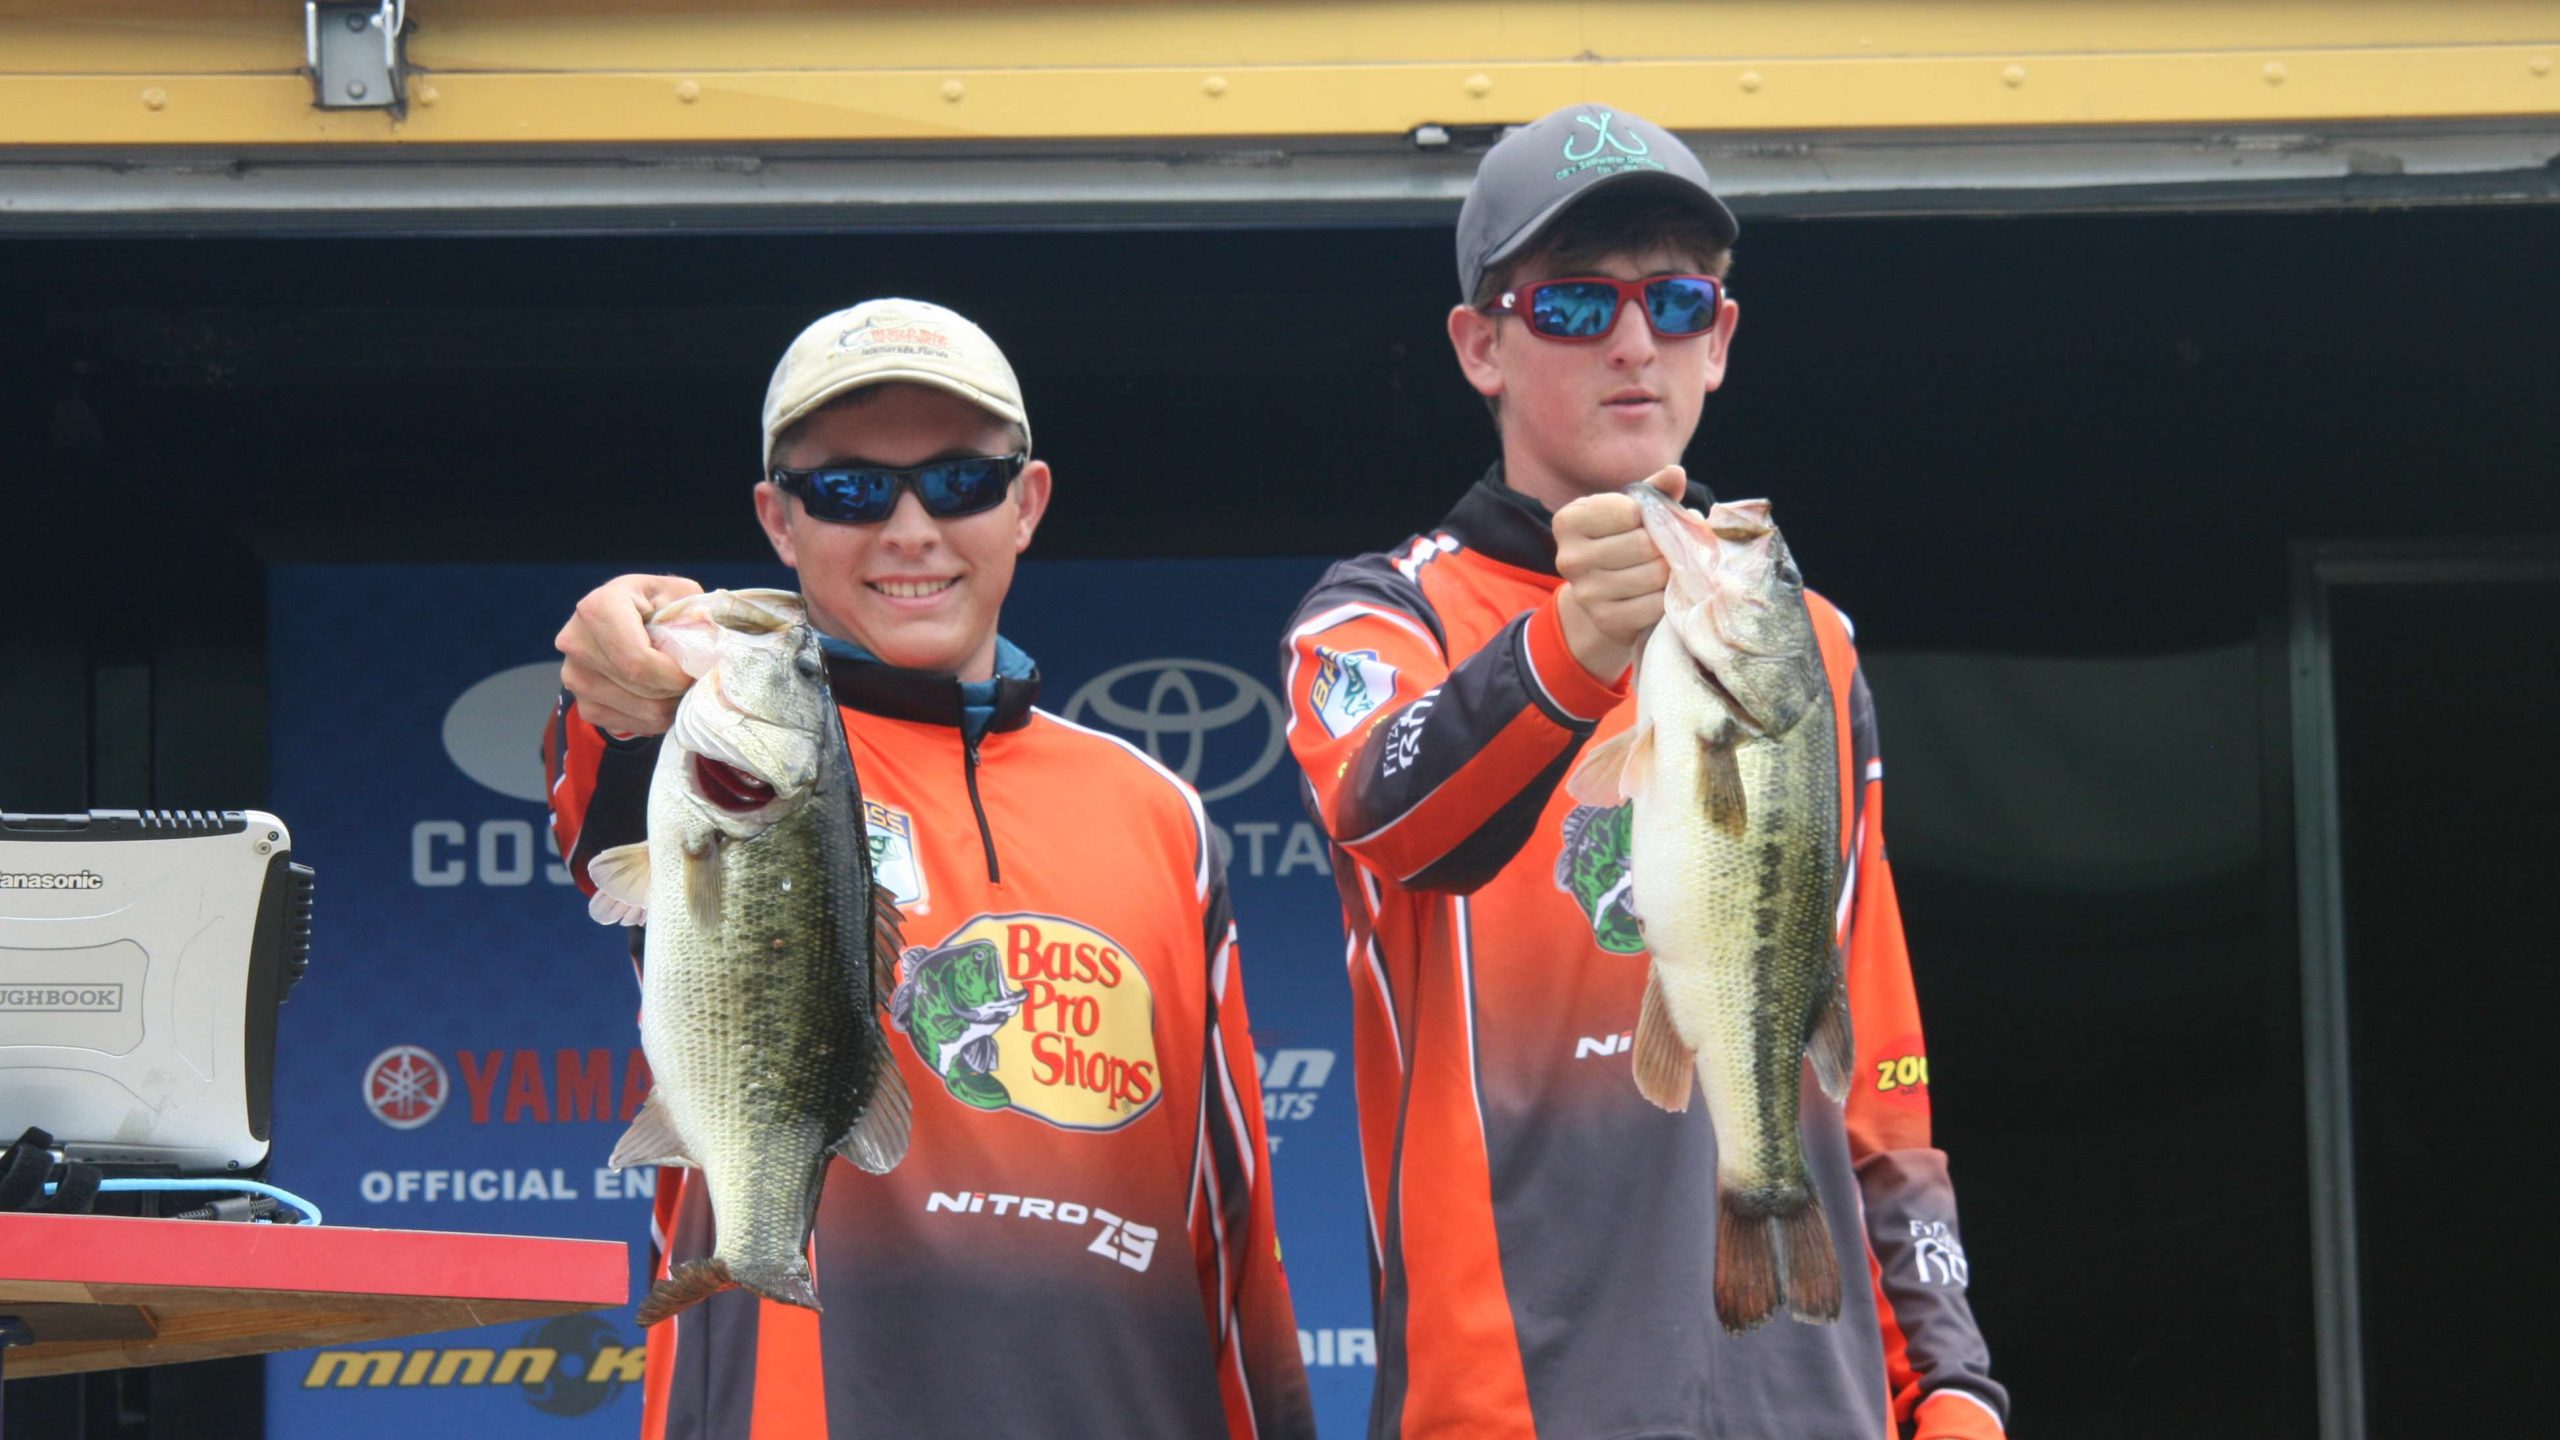 Stephen Whitlow and Jared Young of Sarasota (Fla.) High display two nice fish from their 11-14 total. That was good enough for eighth place.